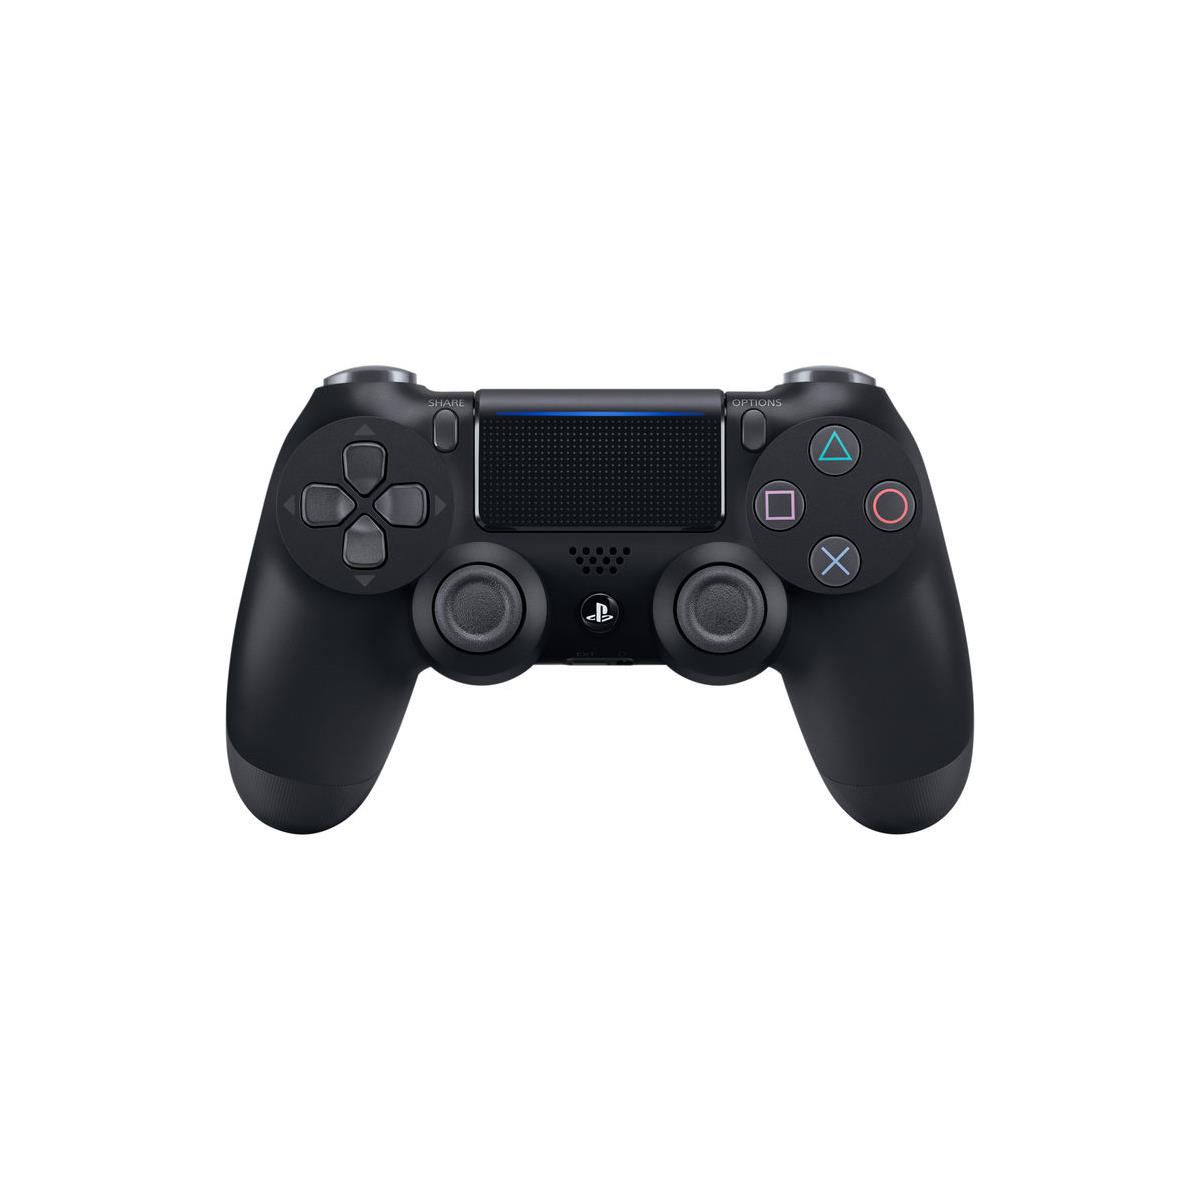 DualShock 4 Wireless Controller for PlayStation 4 (Black or Blue)